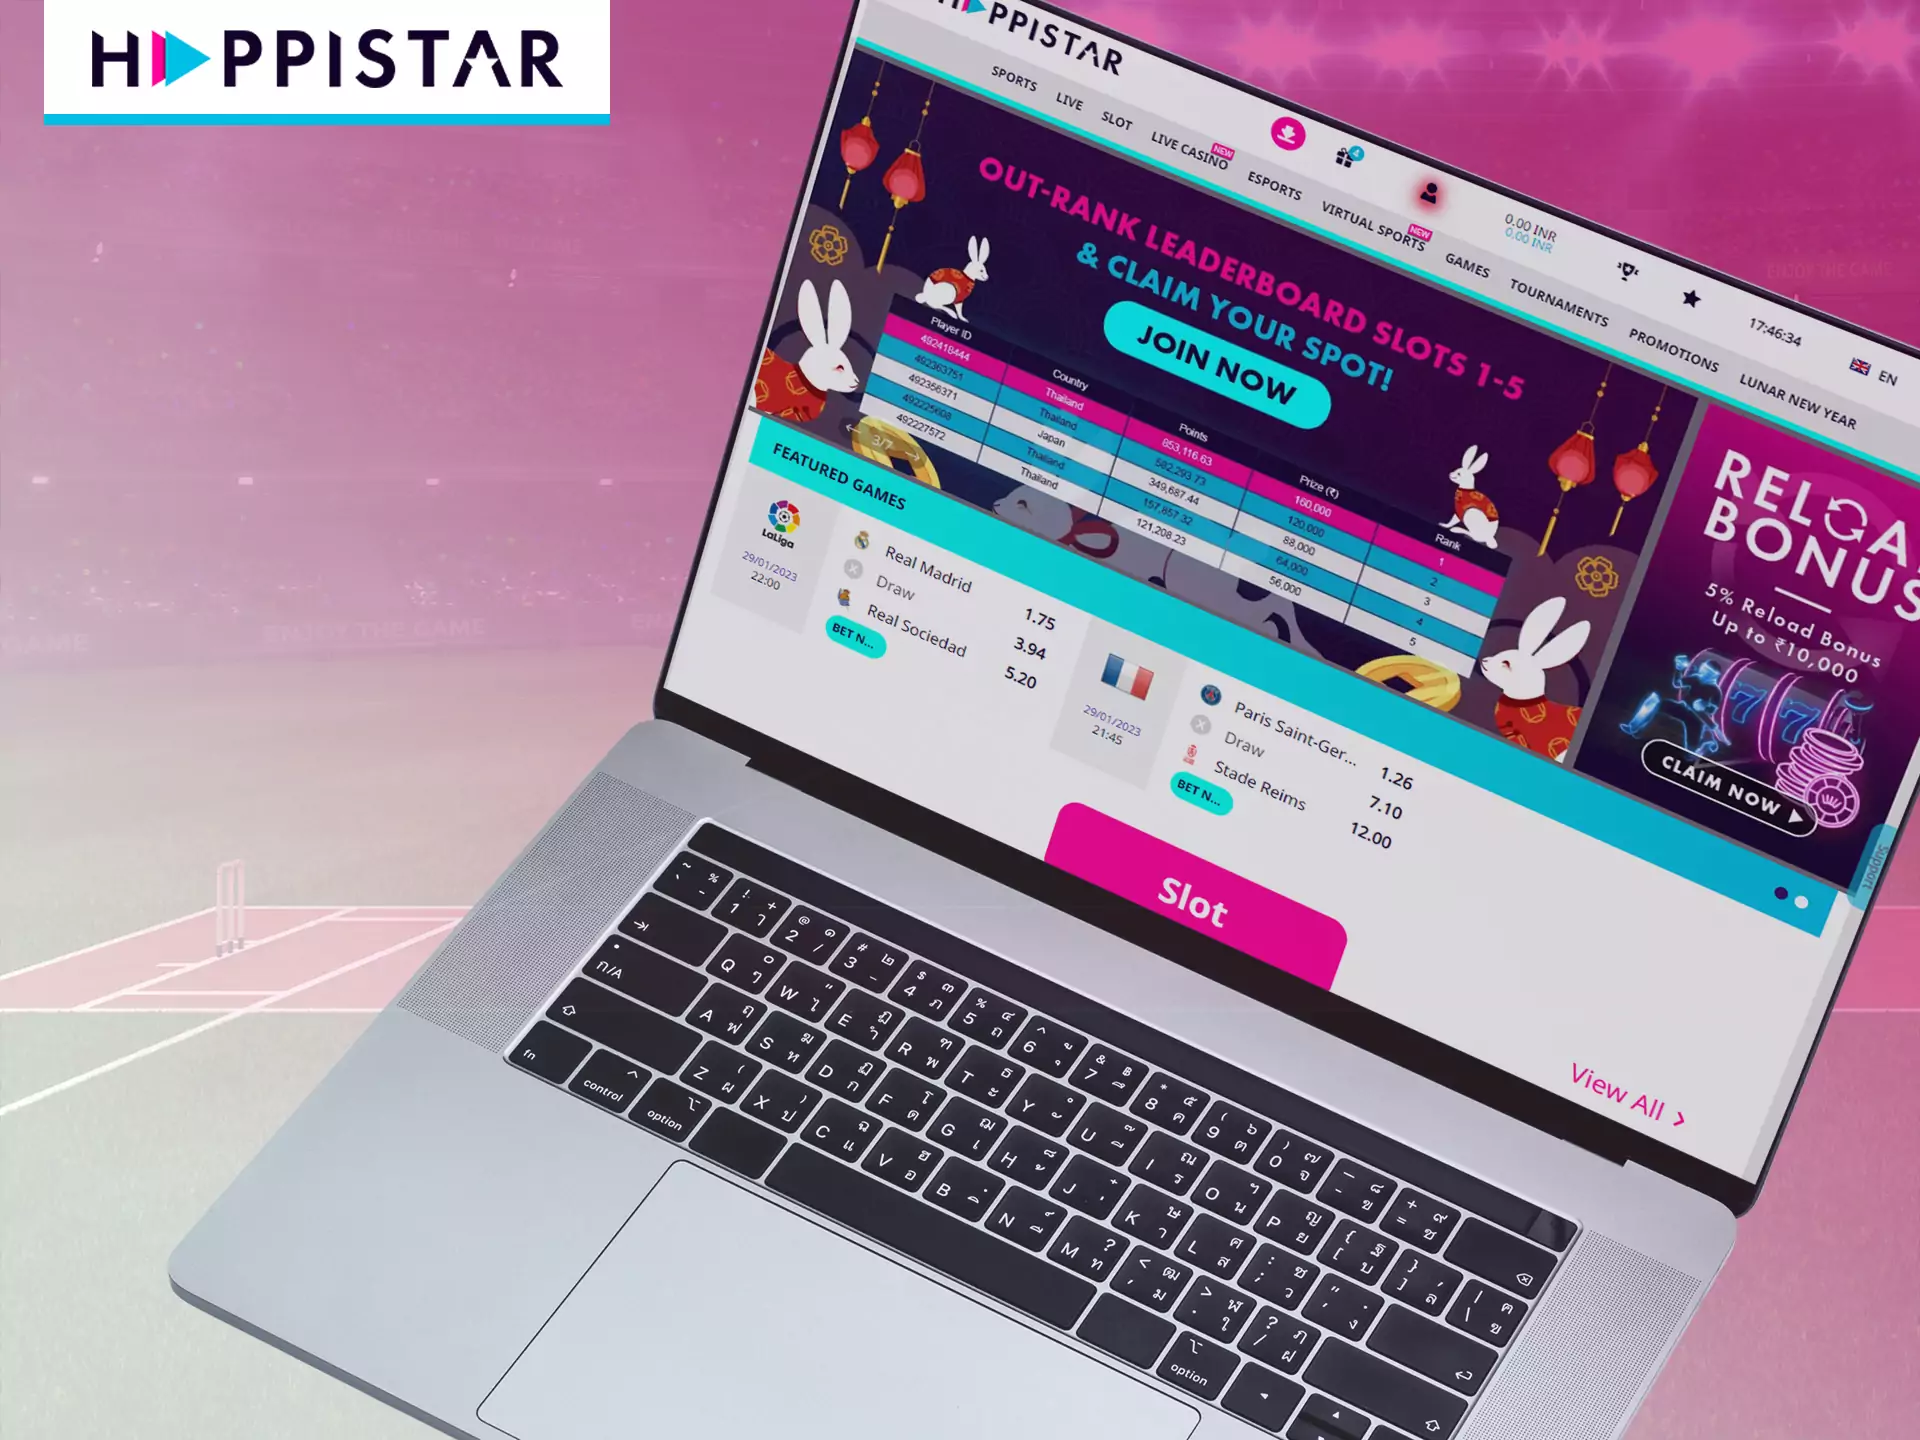 Happistar has a great official website for desktop and mobile devices.